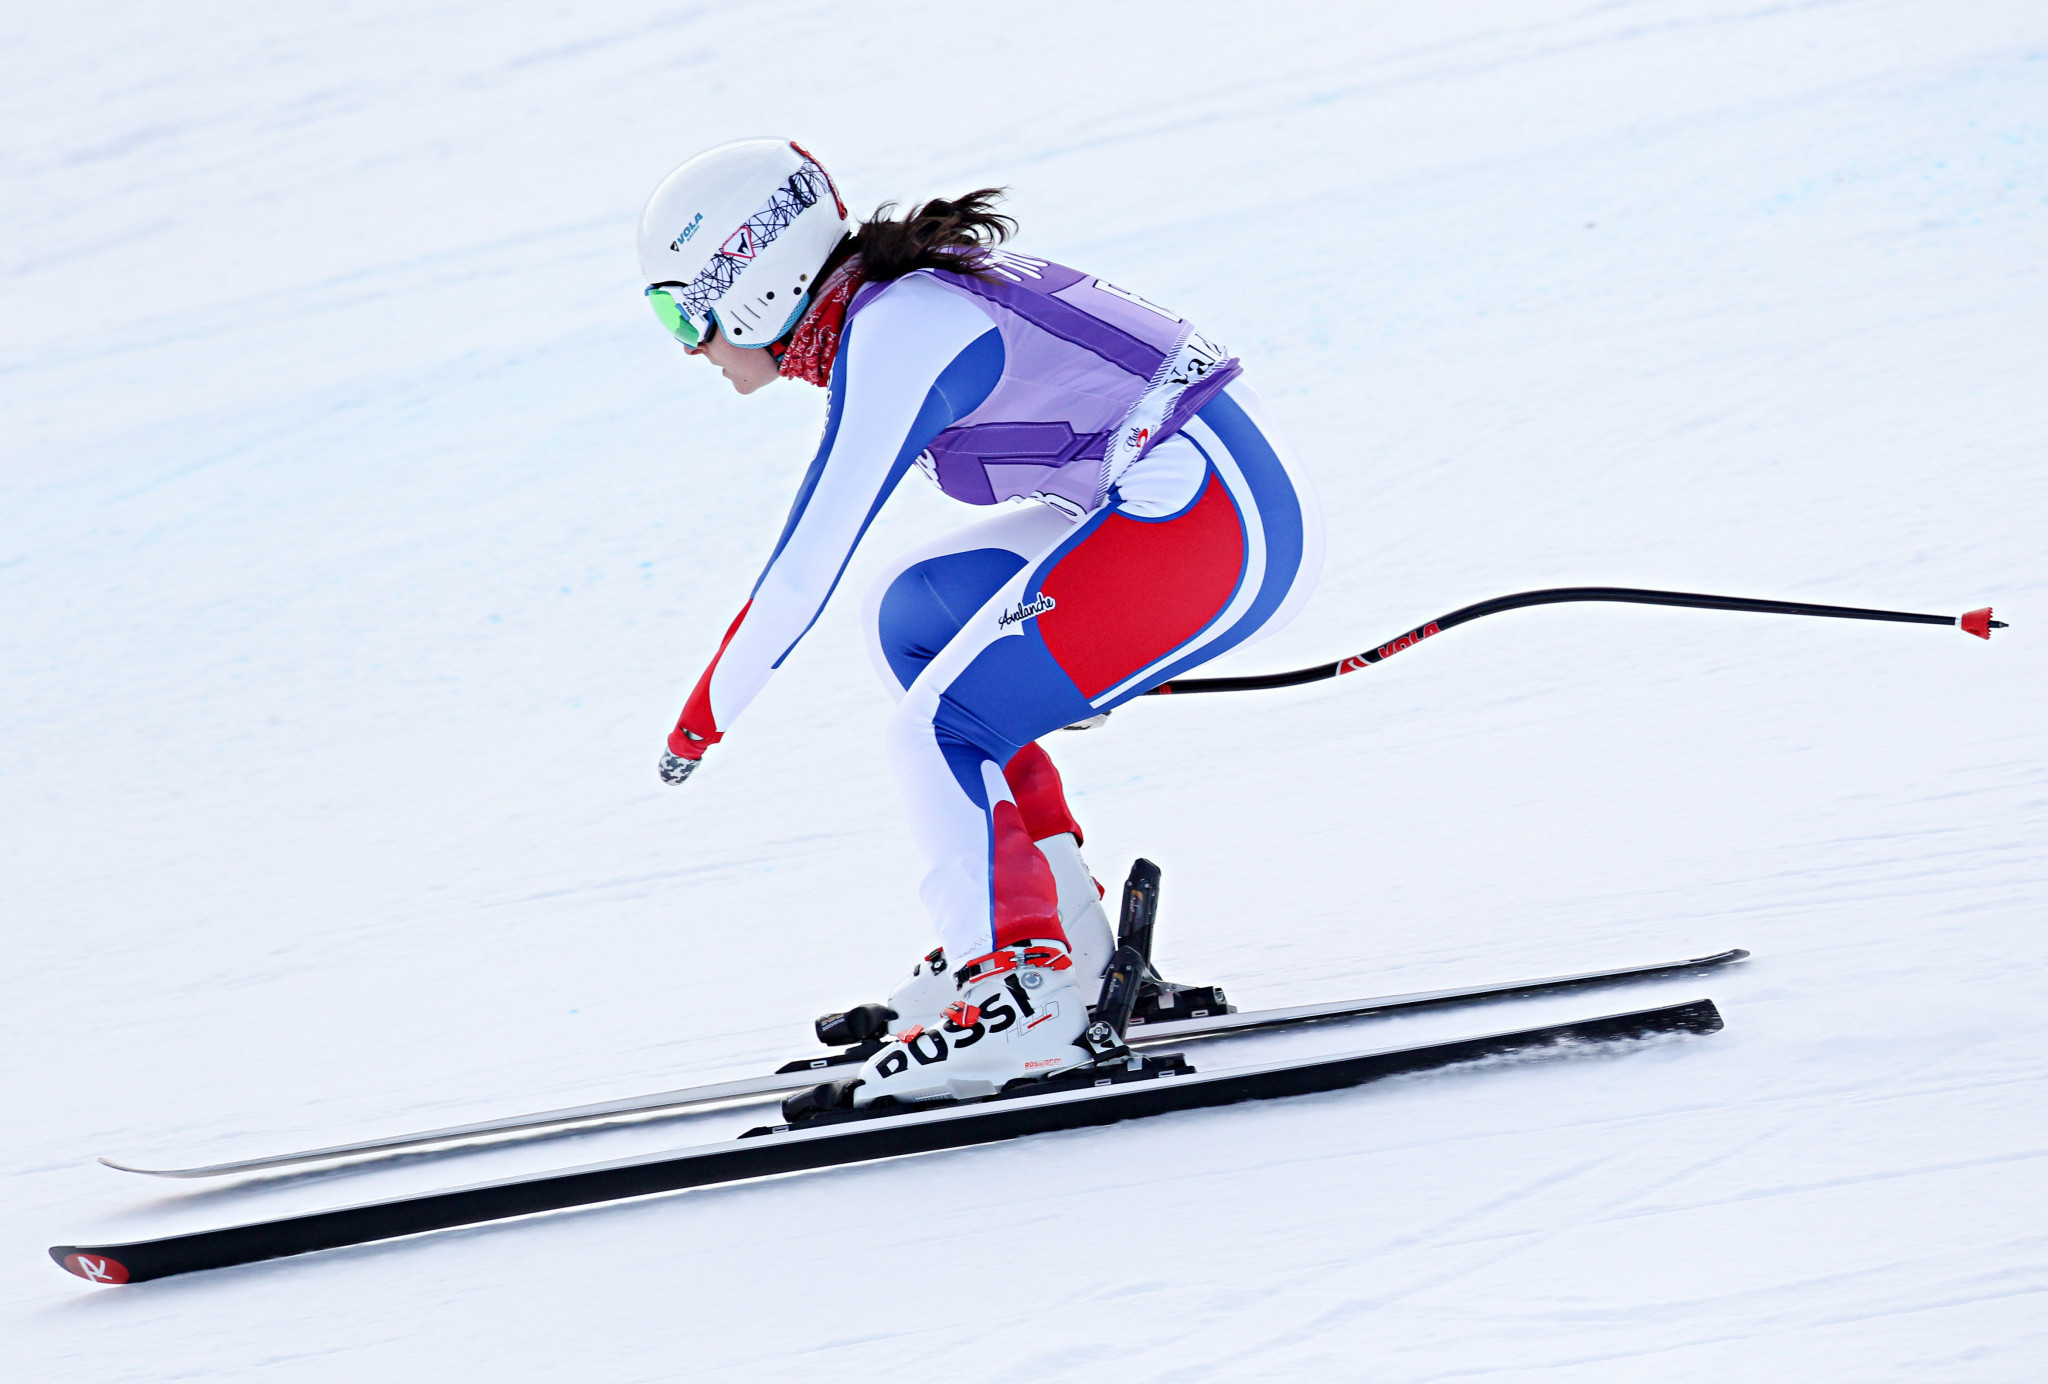 Marie Bochet was hoping to impress on home snow in Tignes ©Getty Images